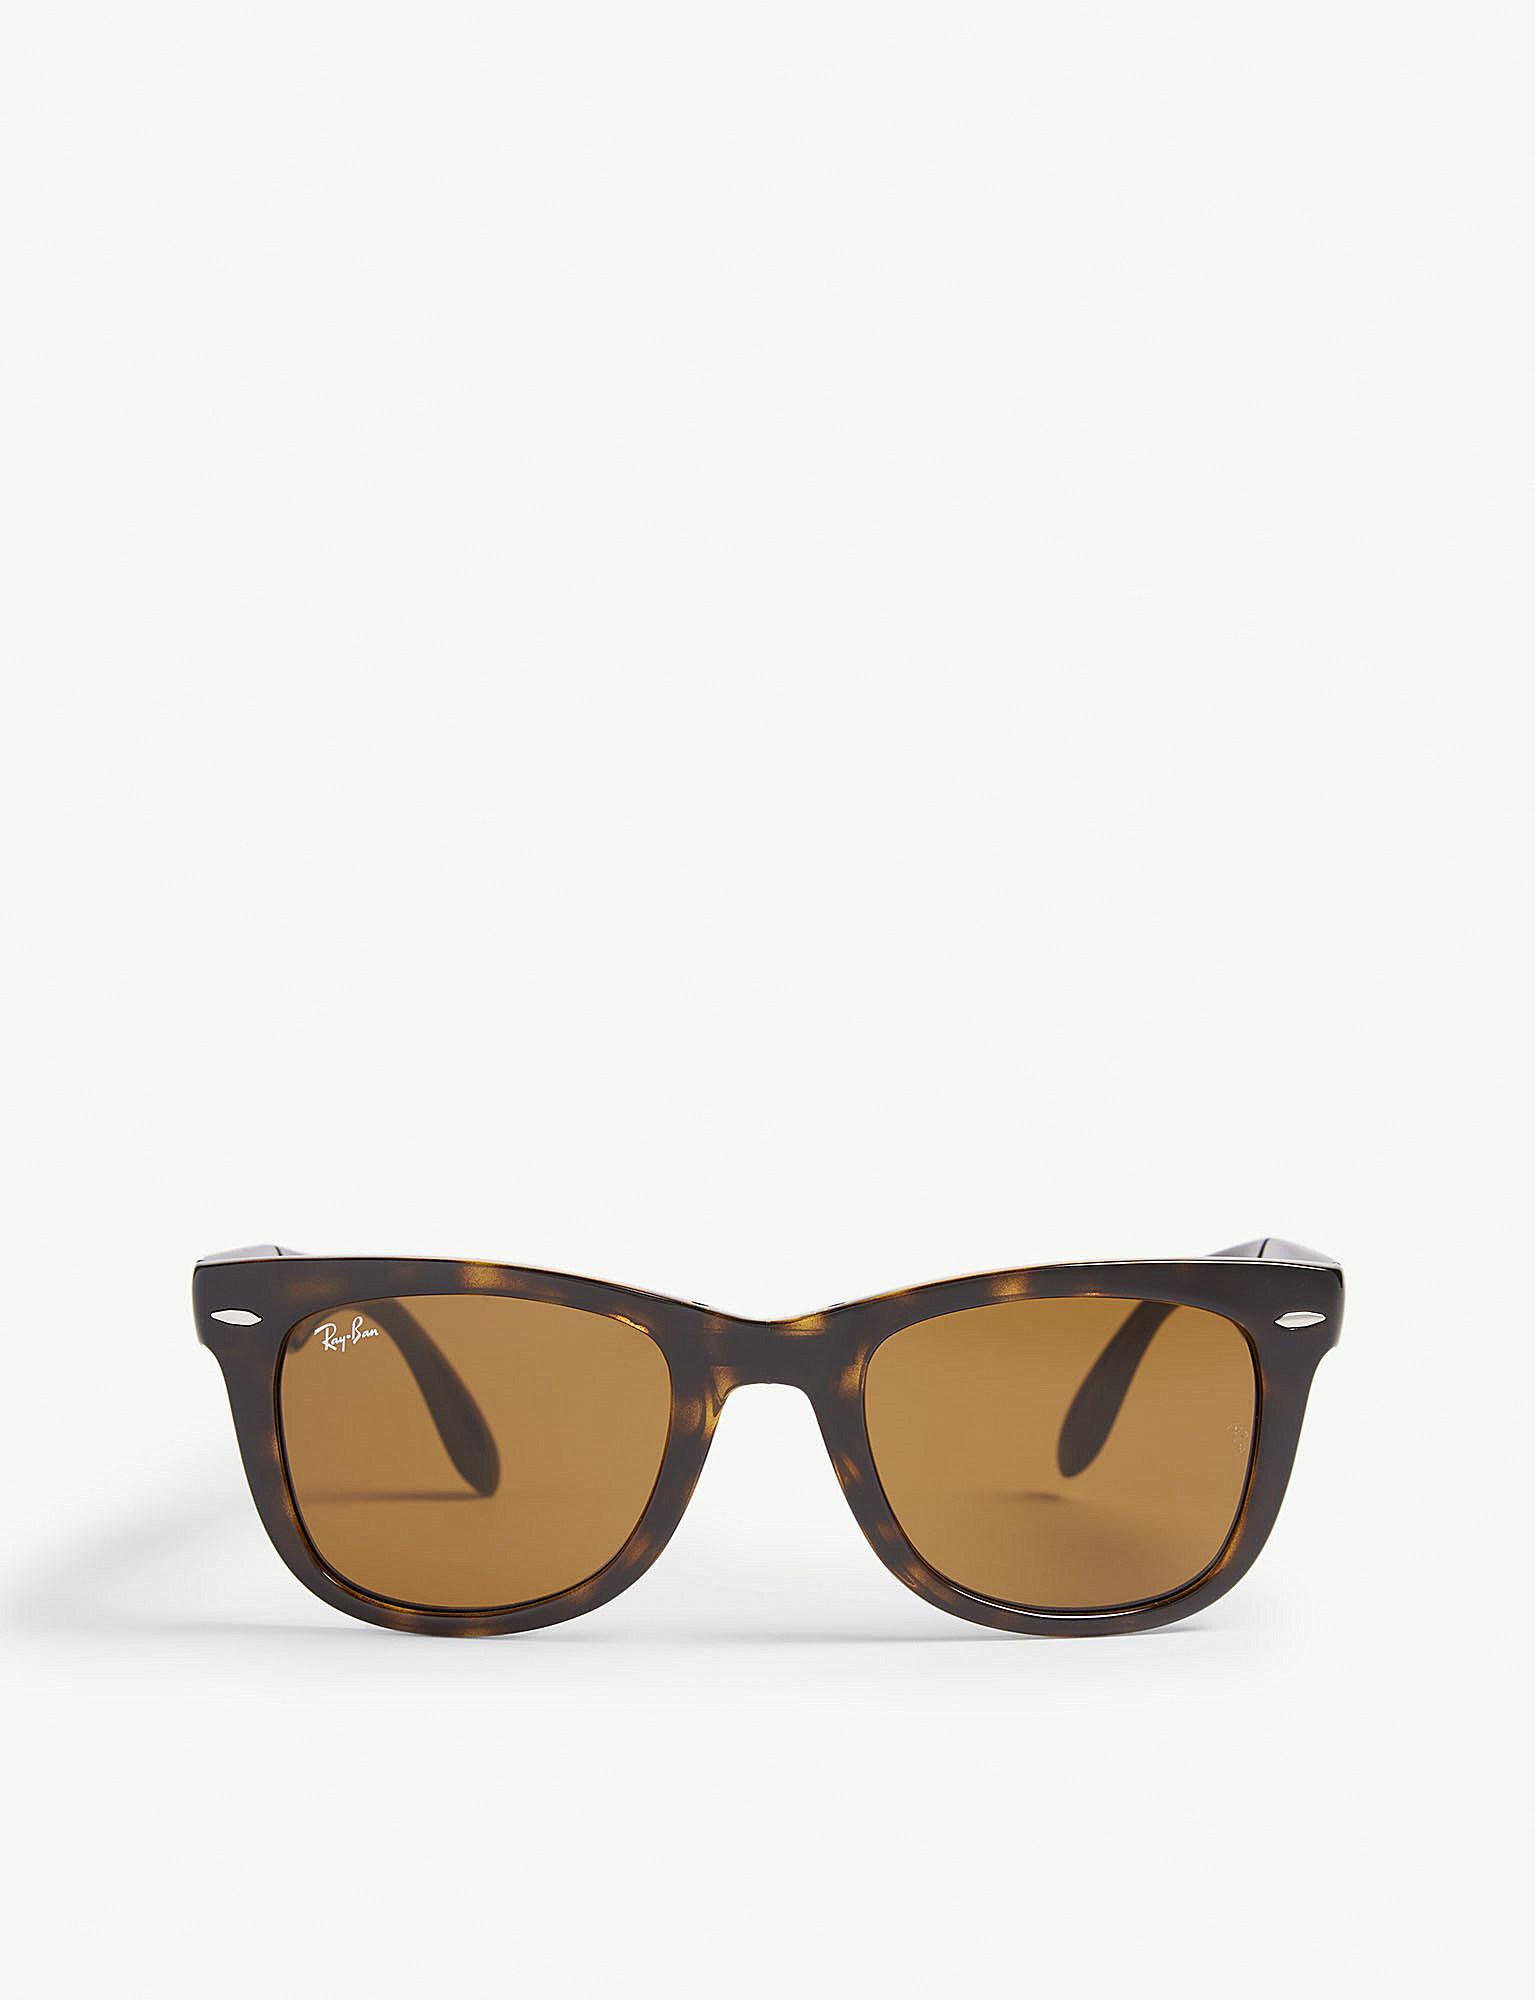 Ray Ban Rb2140 50 Original Way In Brown For Men Lyst